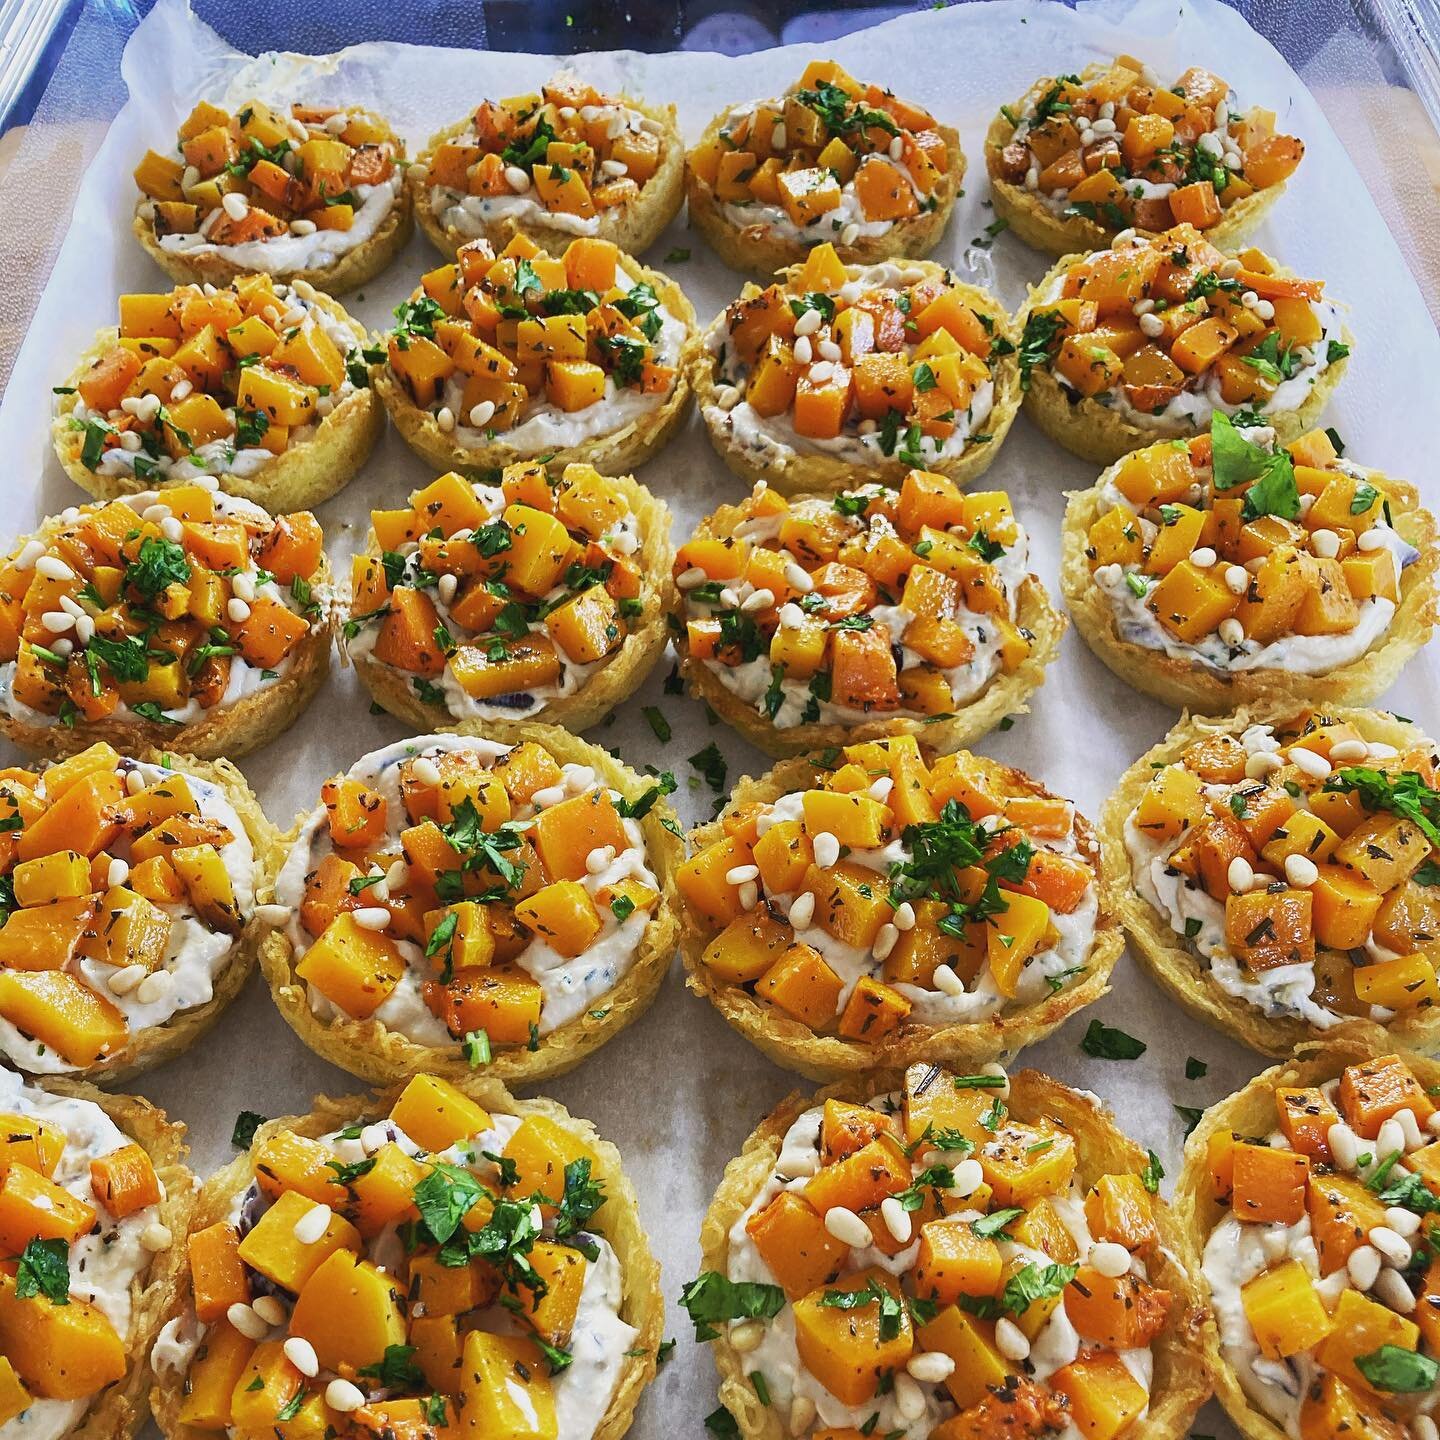 Hello world!  Prepping up our vegan butternut squash and pine nut tarts! For whole sale delivery. Check out our website to see full range. 
 #glutenfree #vegan #wholesale